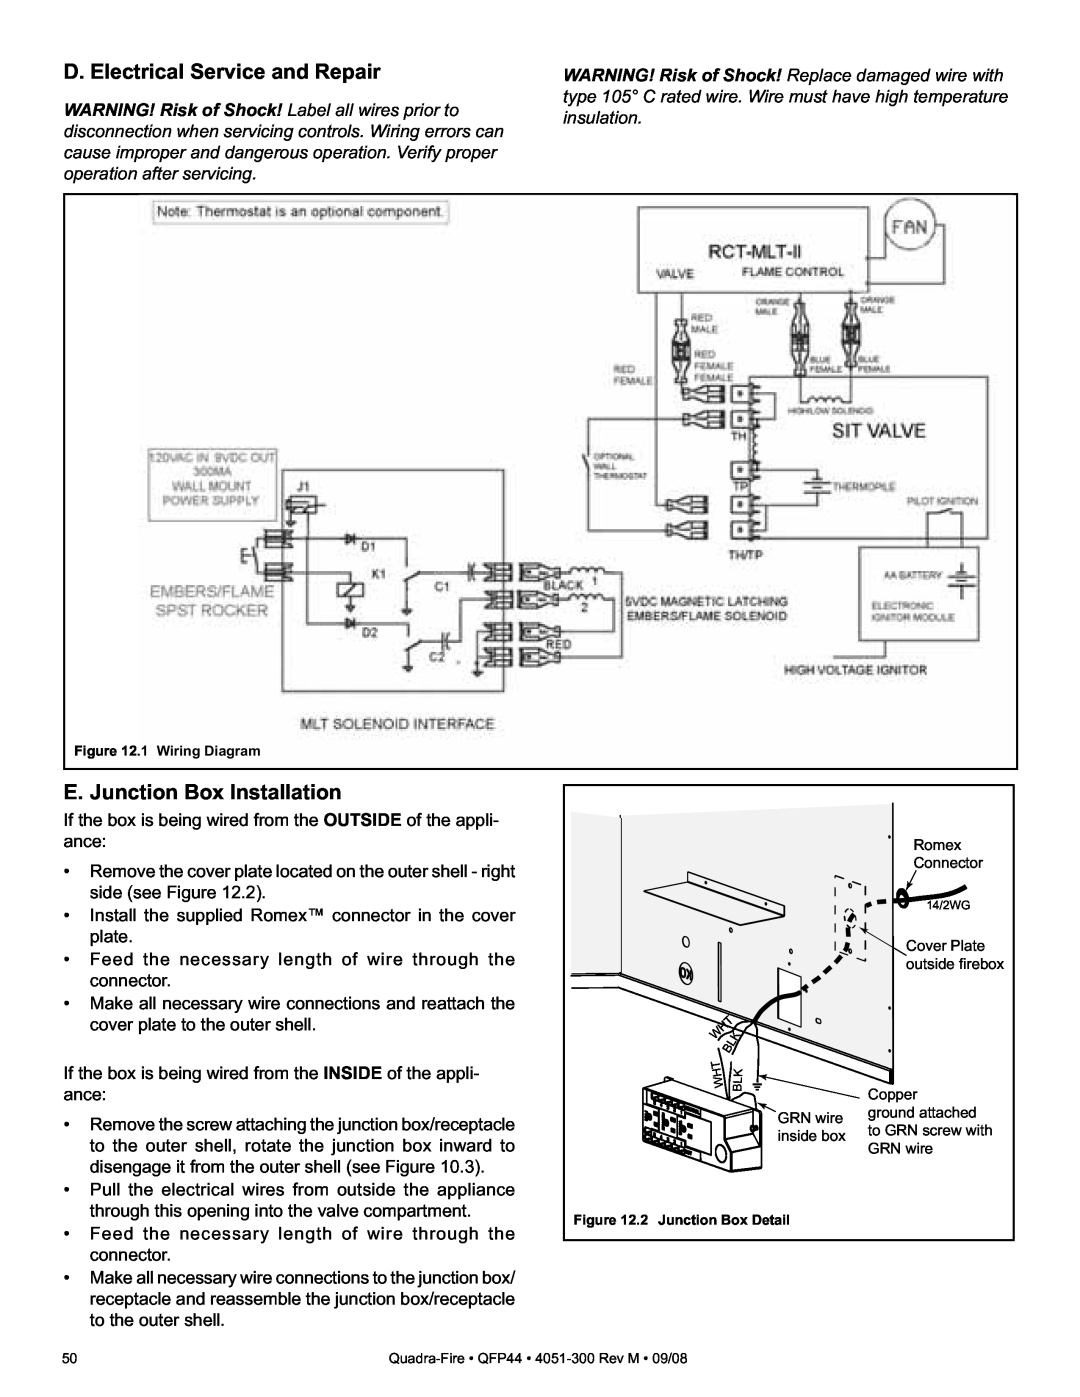 Quadra-Fire QFP44 D. Electrical Service and Repair, E. Junction Box Installation, 1 Wiring Diagram, 2 Junction Box Detail 